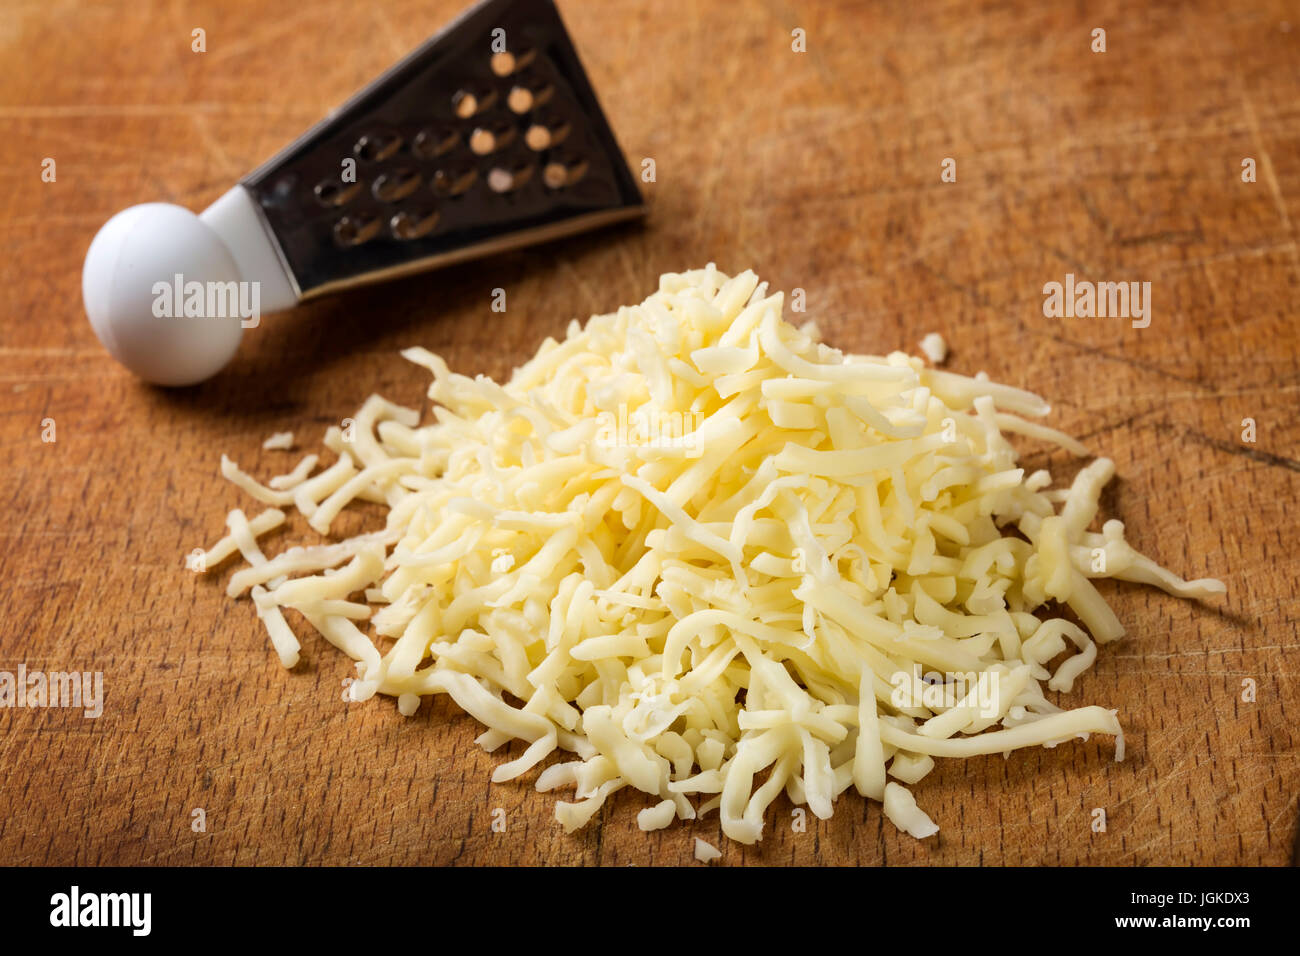 Close up of freshly grated parmesan cheese on wooden table Stock Photo